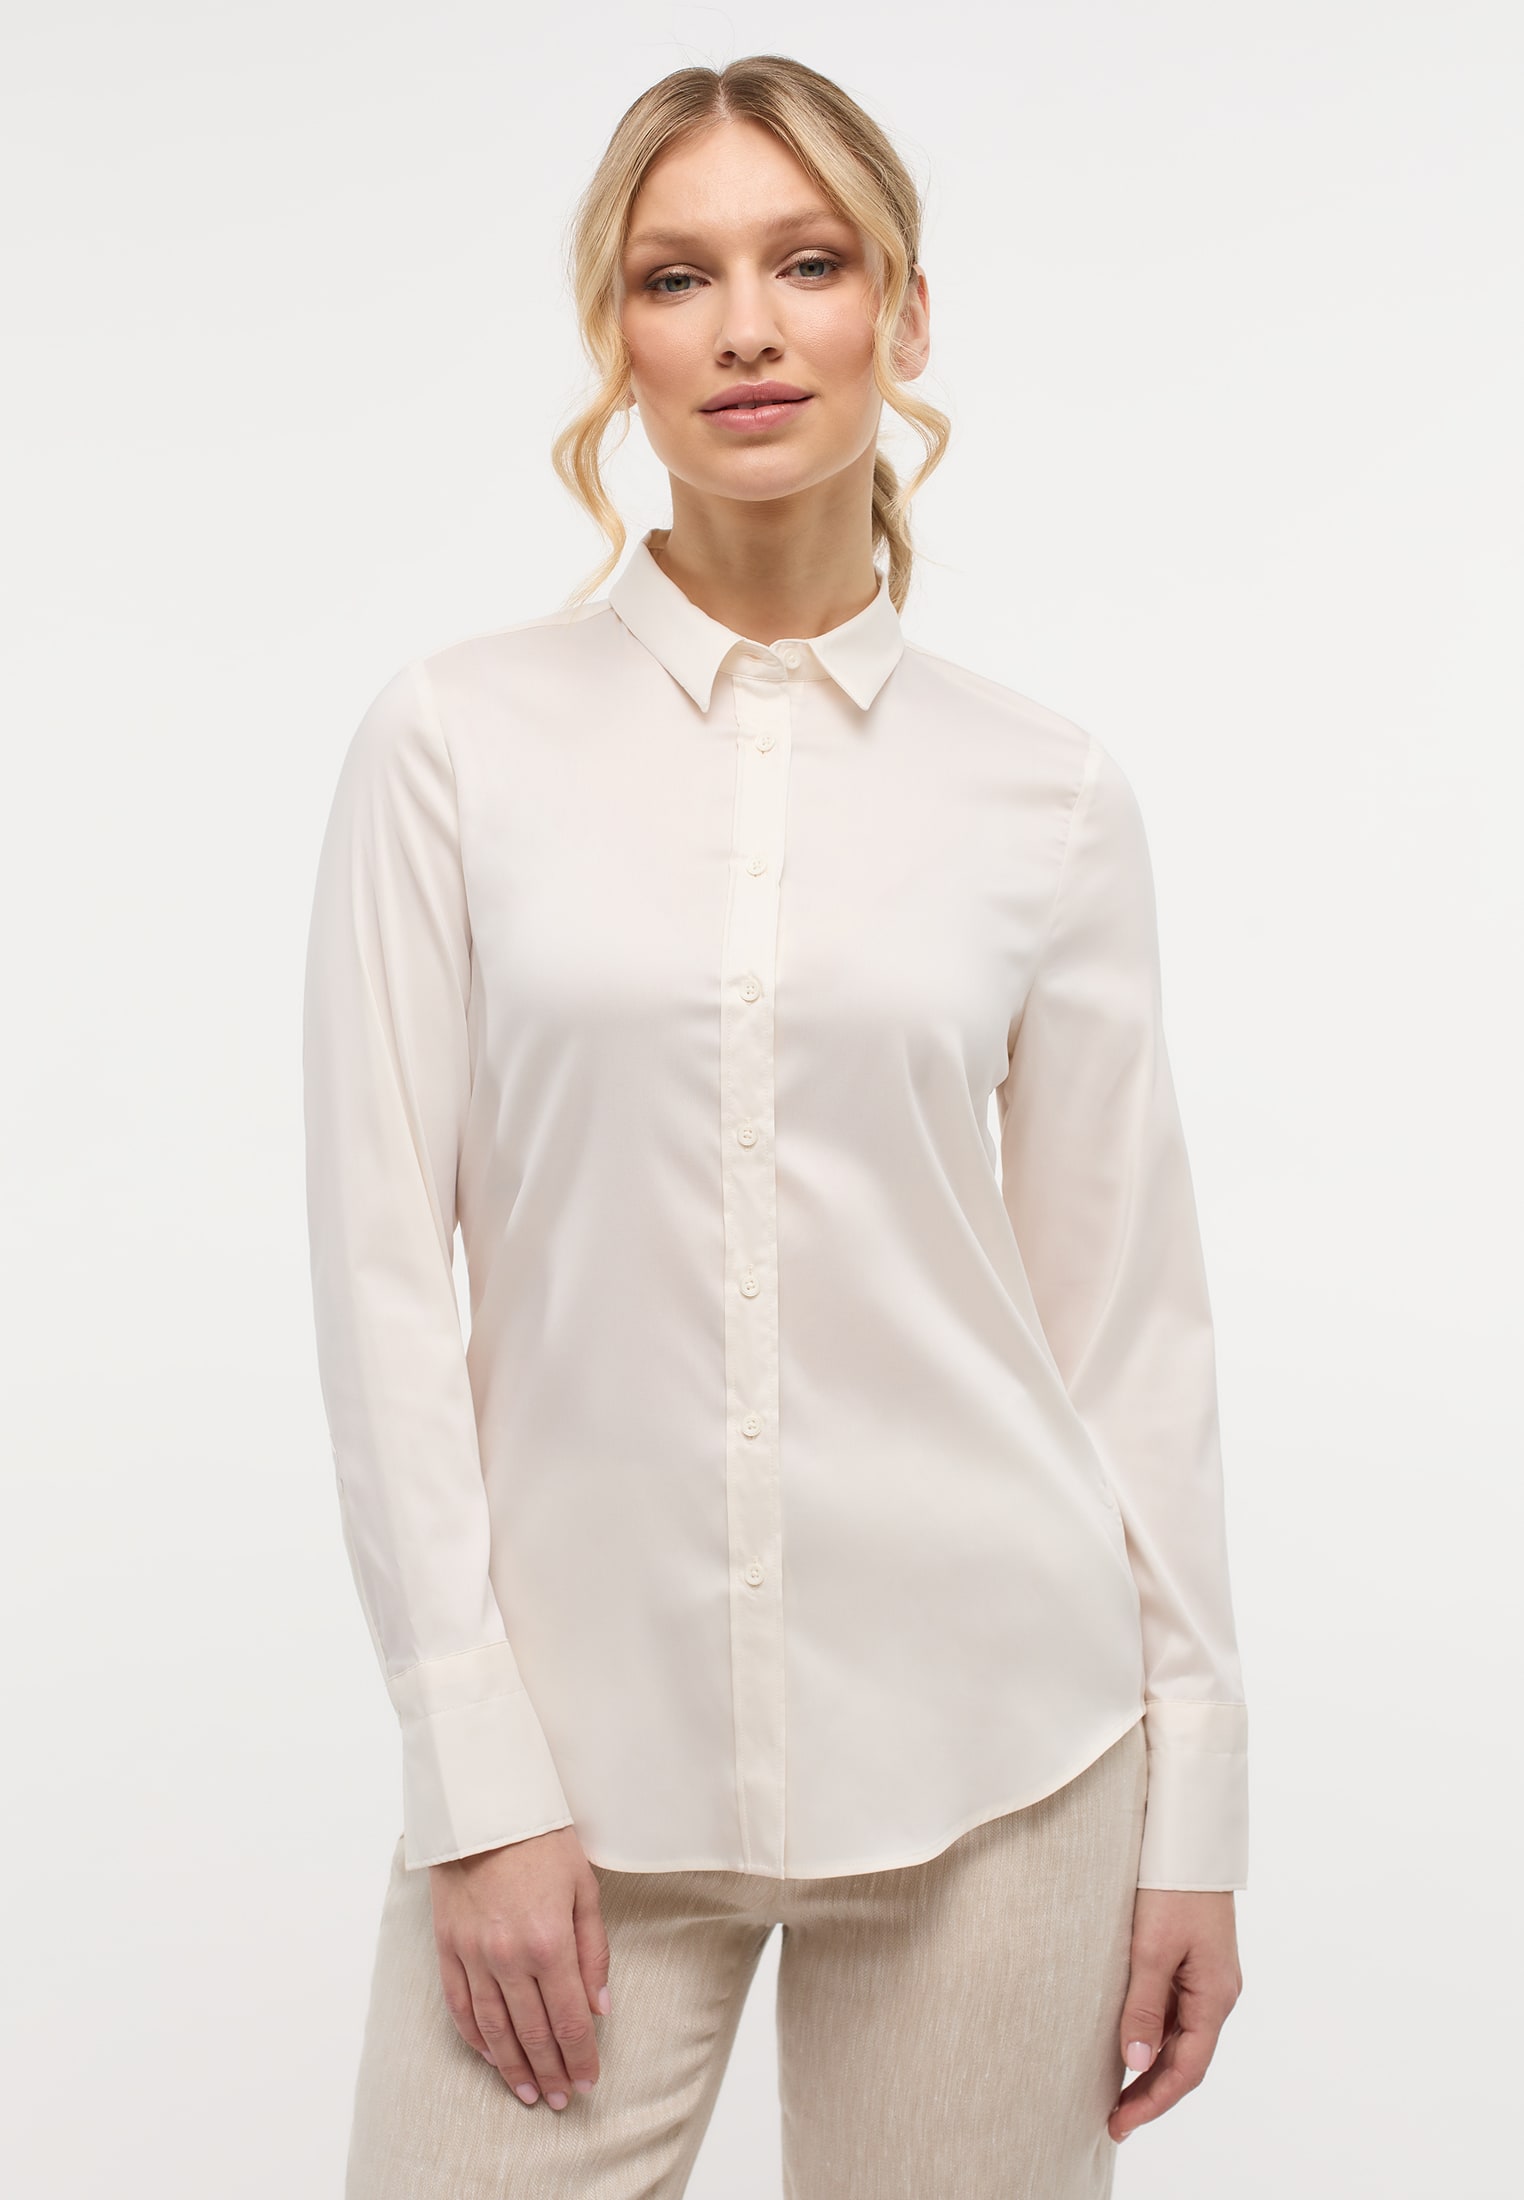 Performance Shirt Bluse in off-white unifarben | off-white | Langarm | 38 |  2BL00441-00-02-38-1/1